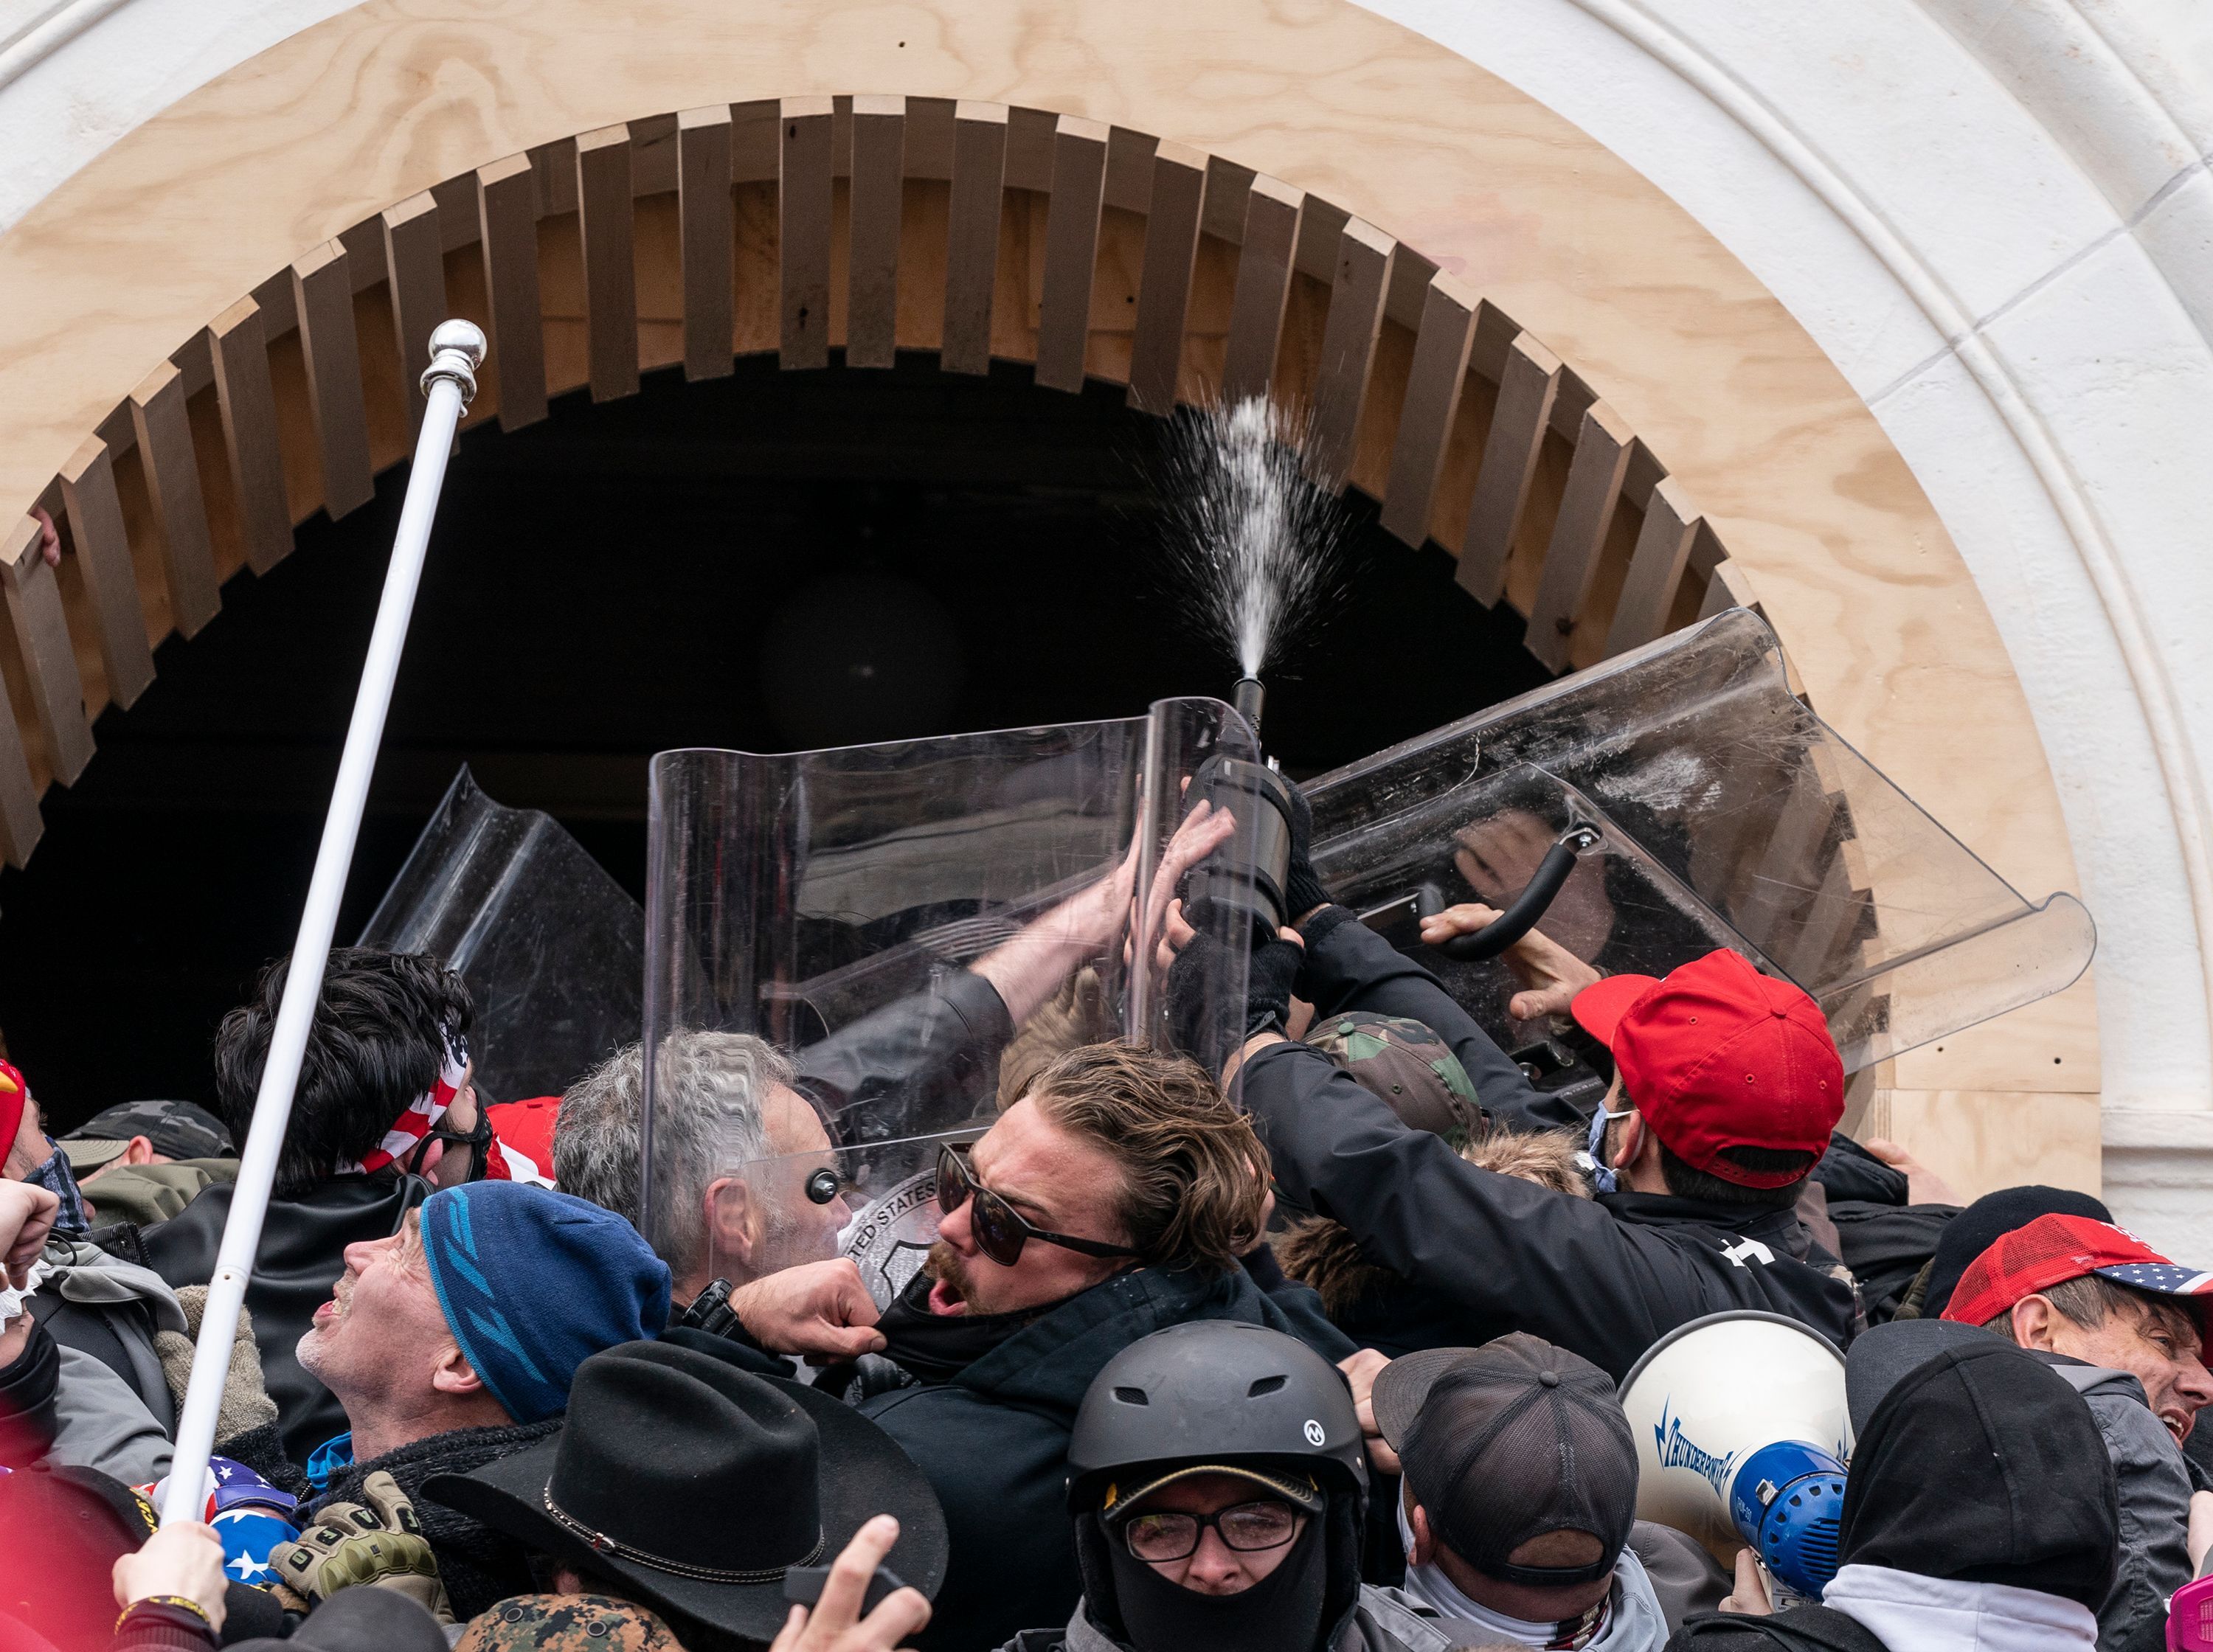 Pro-Trump protesters use tear gas against police as they try to enter the U.S. Capitol building through front doors on Jan. 6, 2021. Fischer is at the center of the melee wearing sunglasses.